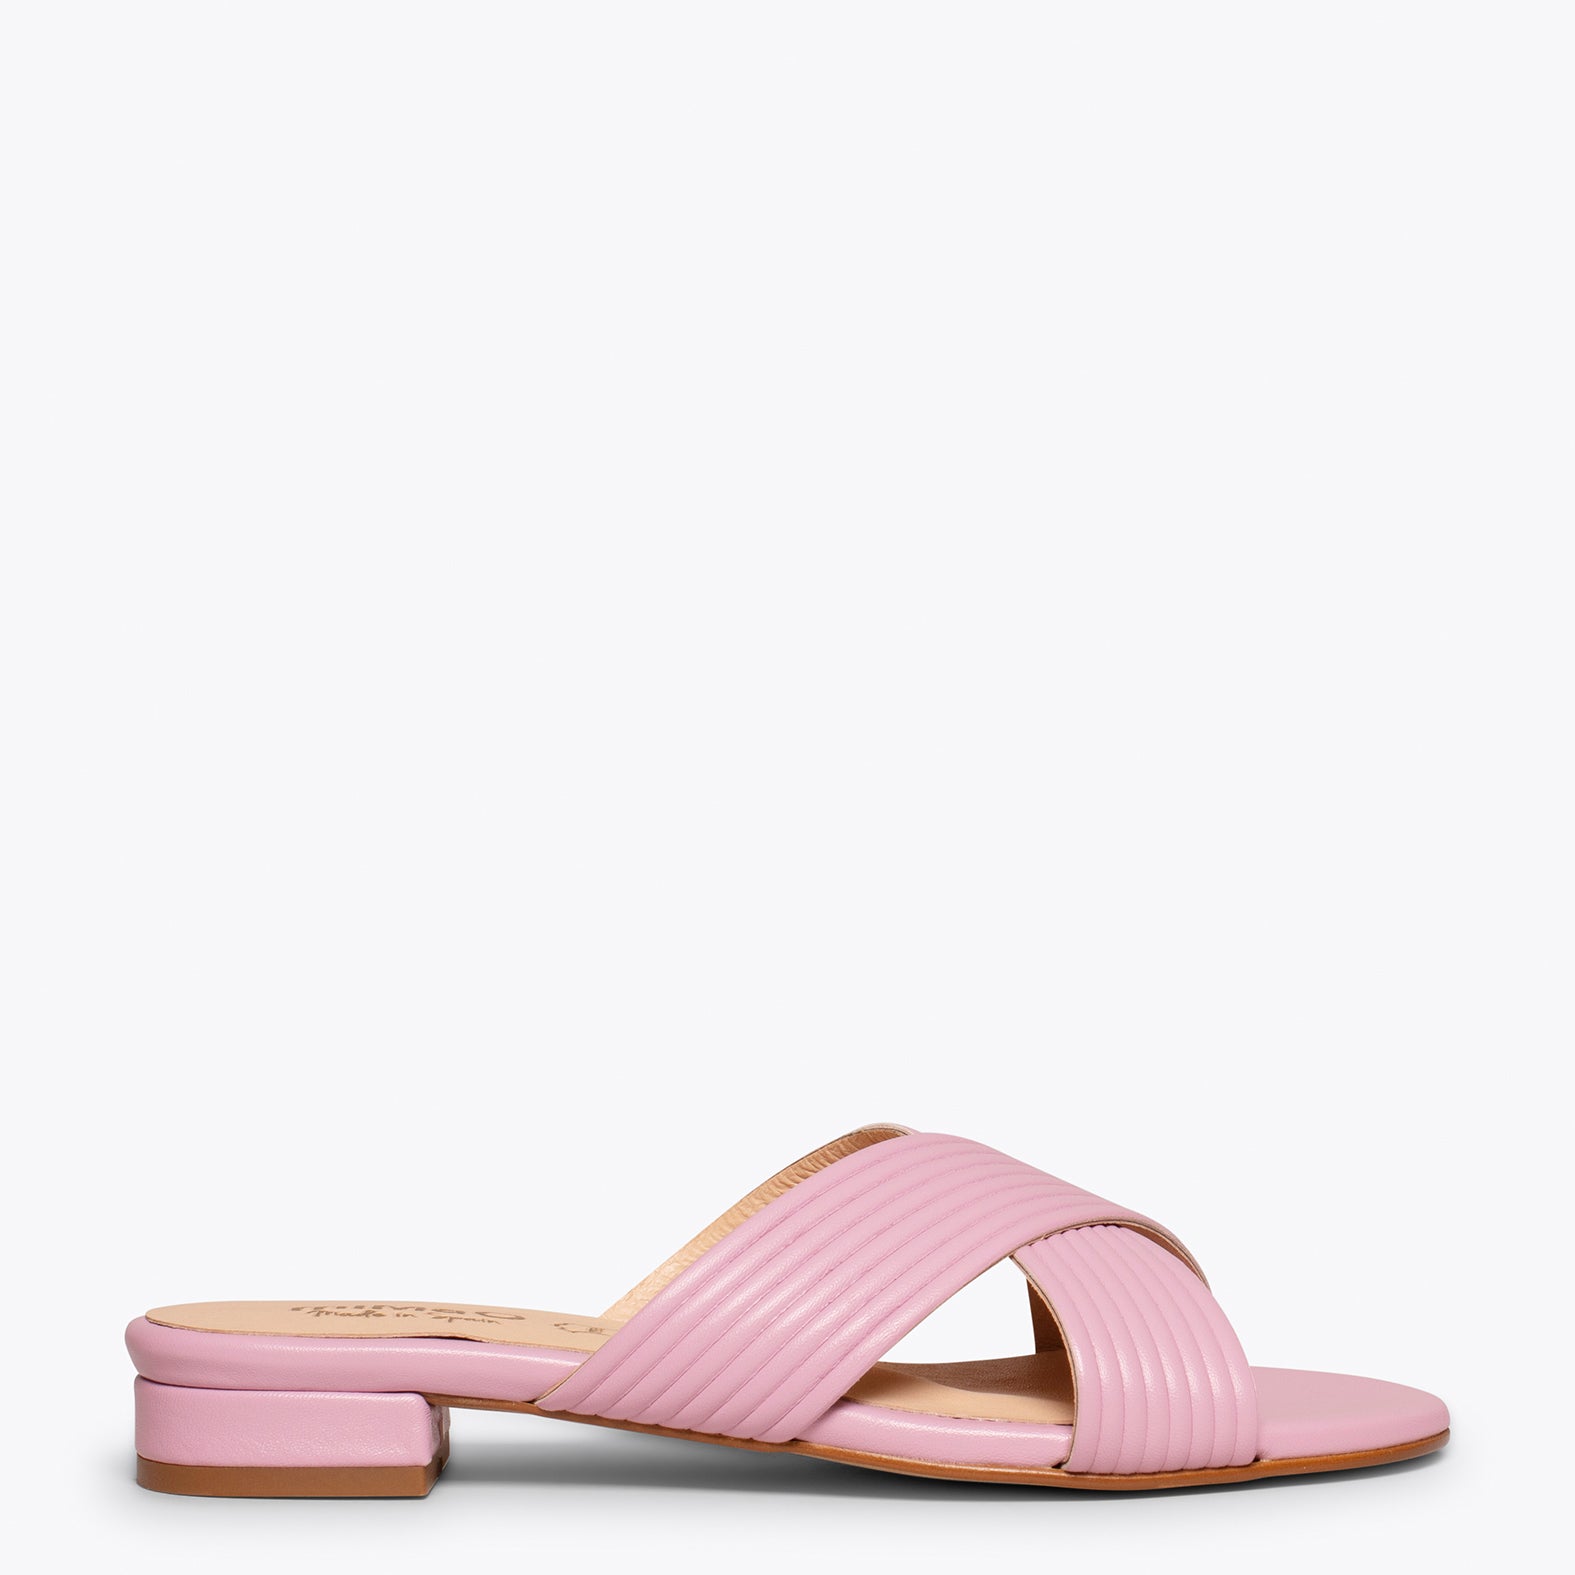 PALA – PINK flat mules with cross straps